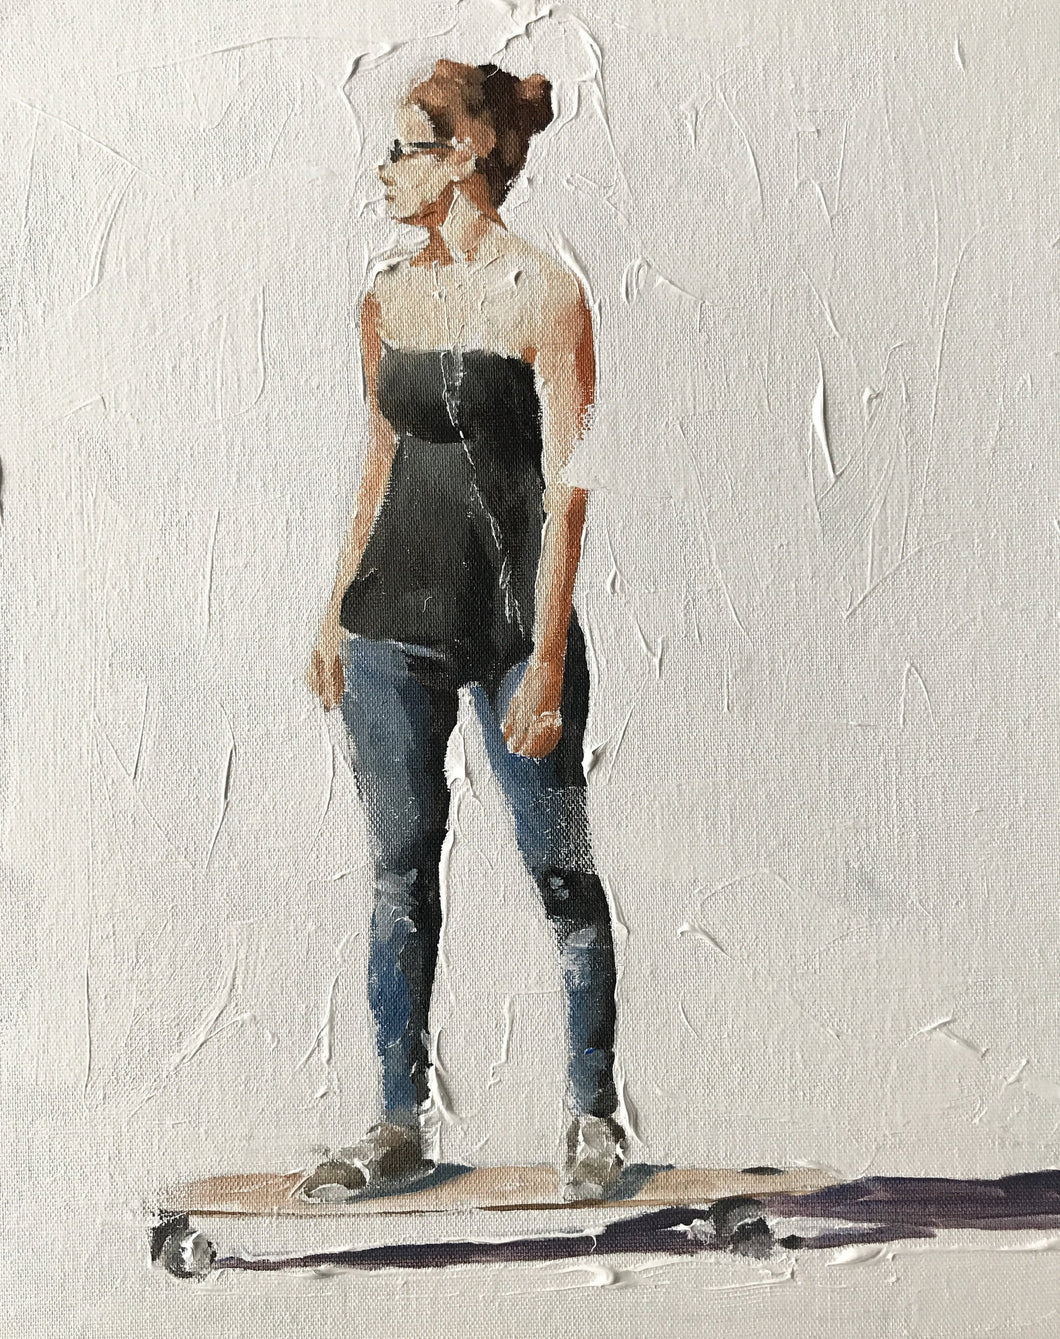 Woman on skateboard Painting, PRINTS, Canvas, Posters, Commissions, Fine Art - from original oil painting by James Coates